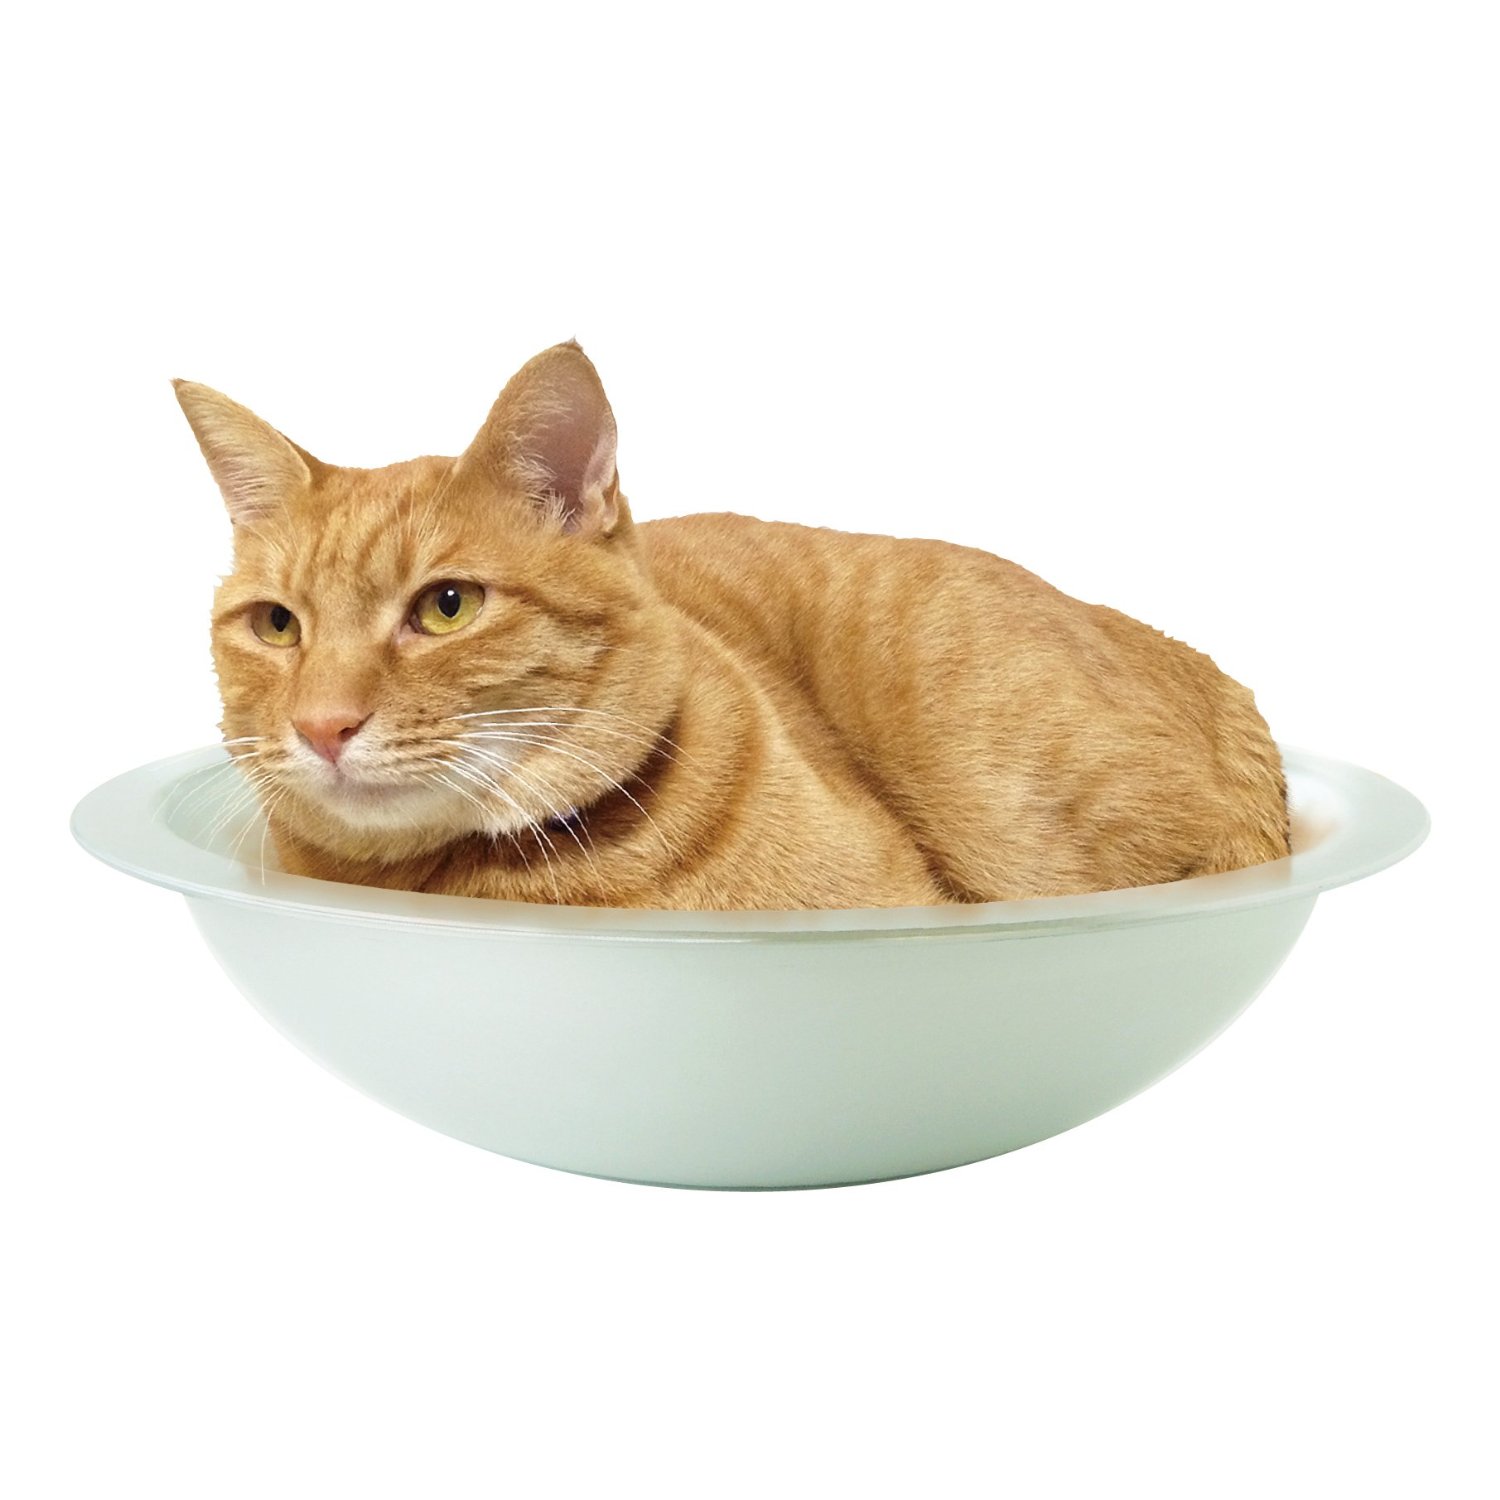 Pussy Cat in bowl